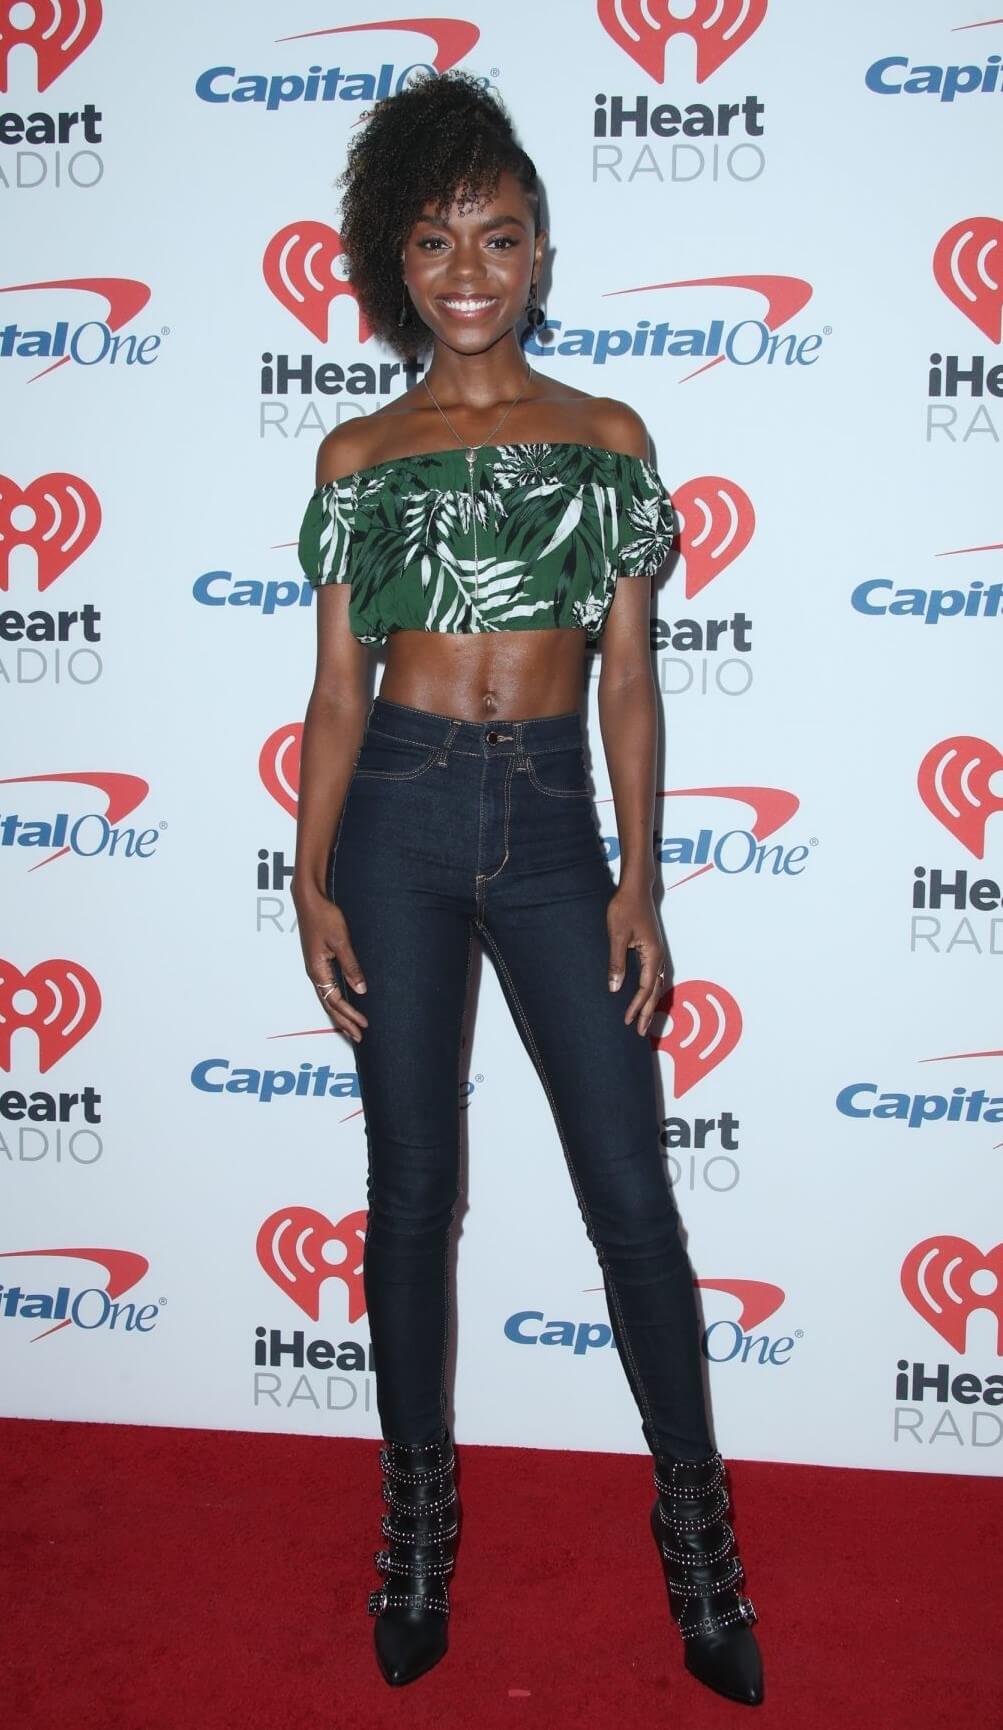 Ashleigh Murray In Green Digital Printed Crop Top With Blue Jeans At iHeartRadio Music Festival in Las Vegas